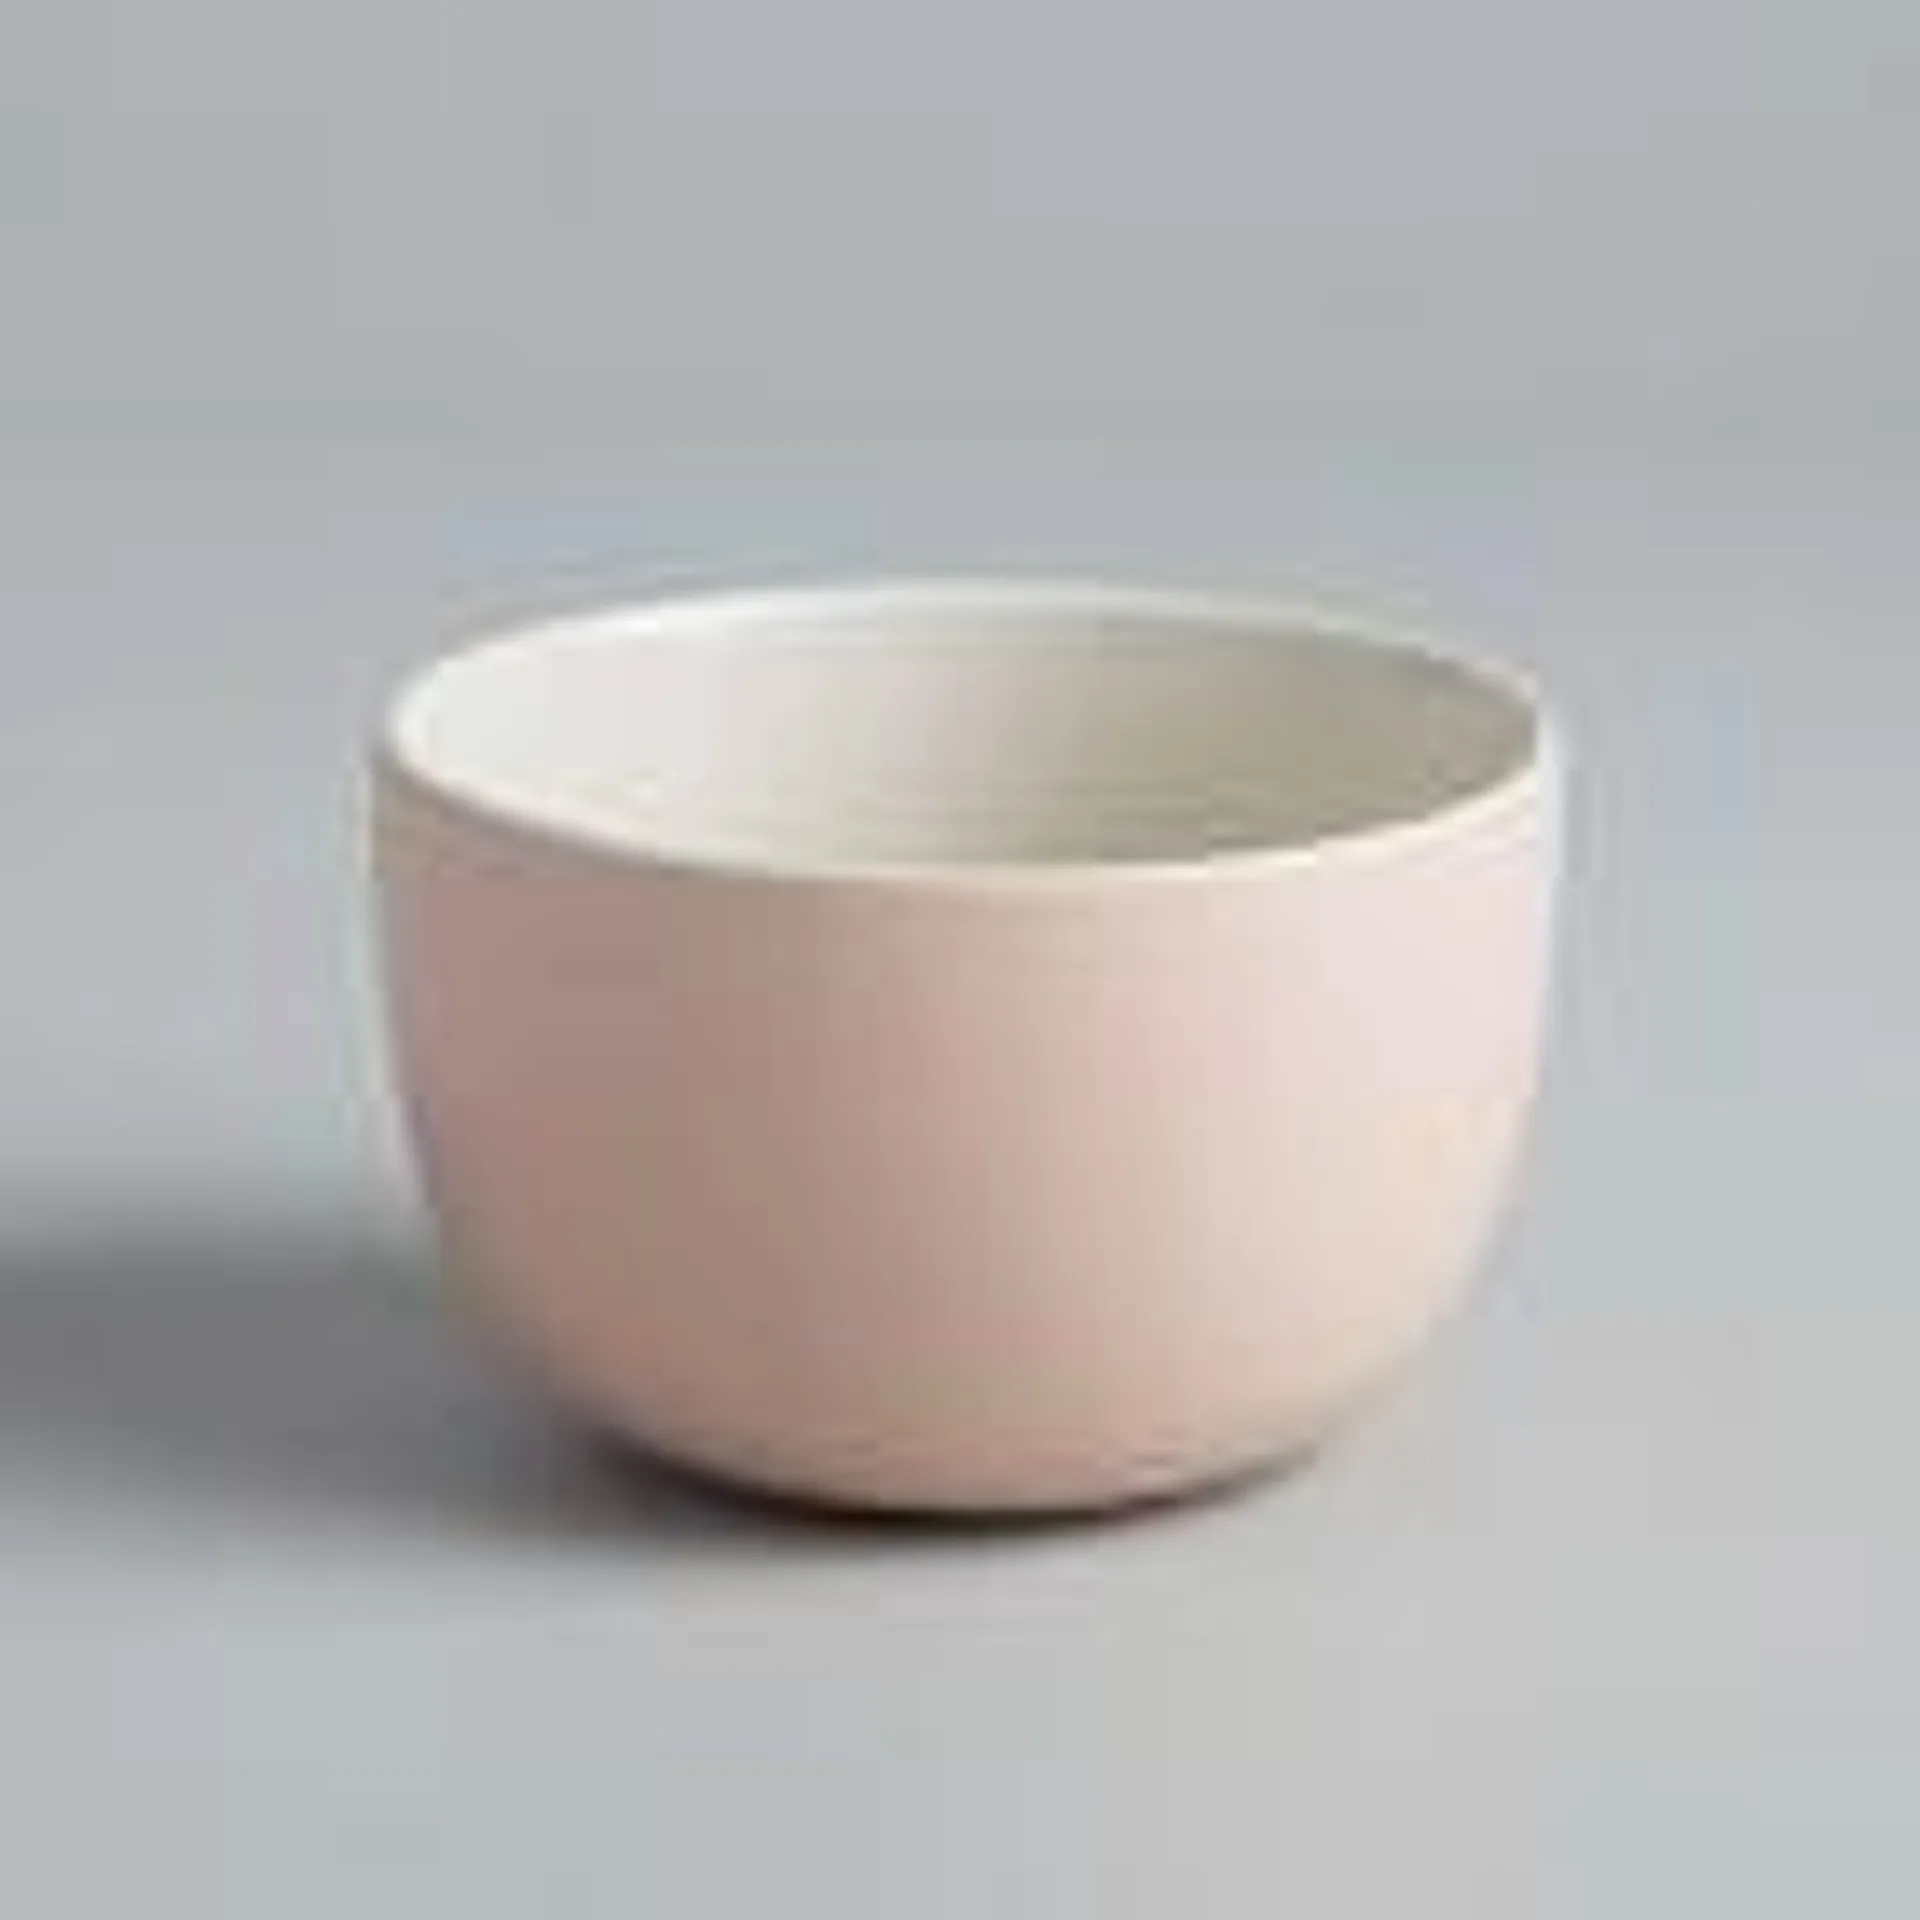 Kaloh Stoneware Cereal Bowl Sets - Clearance